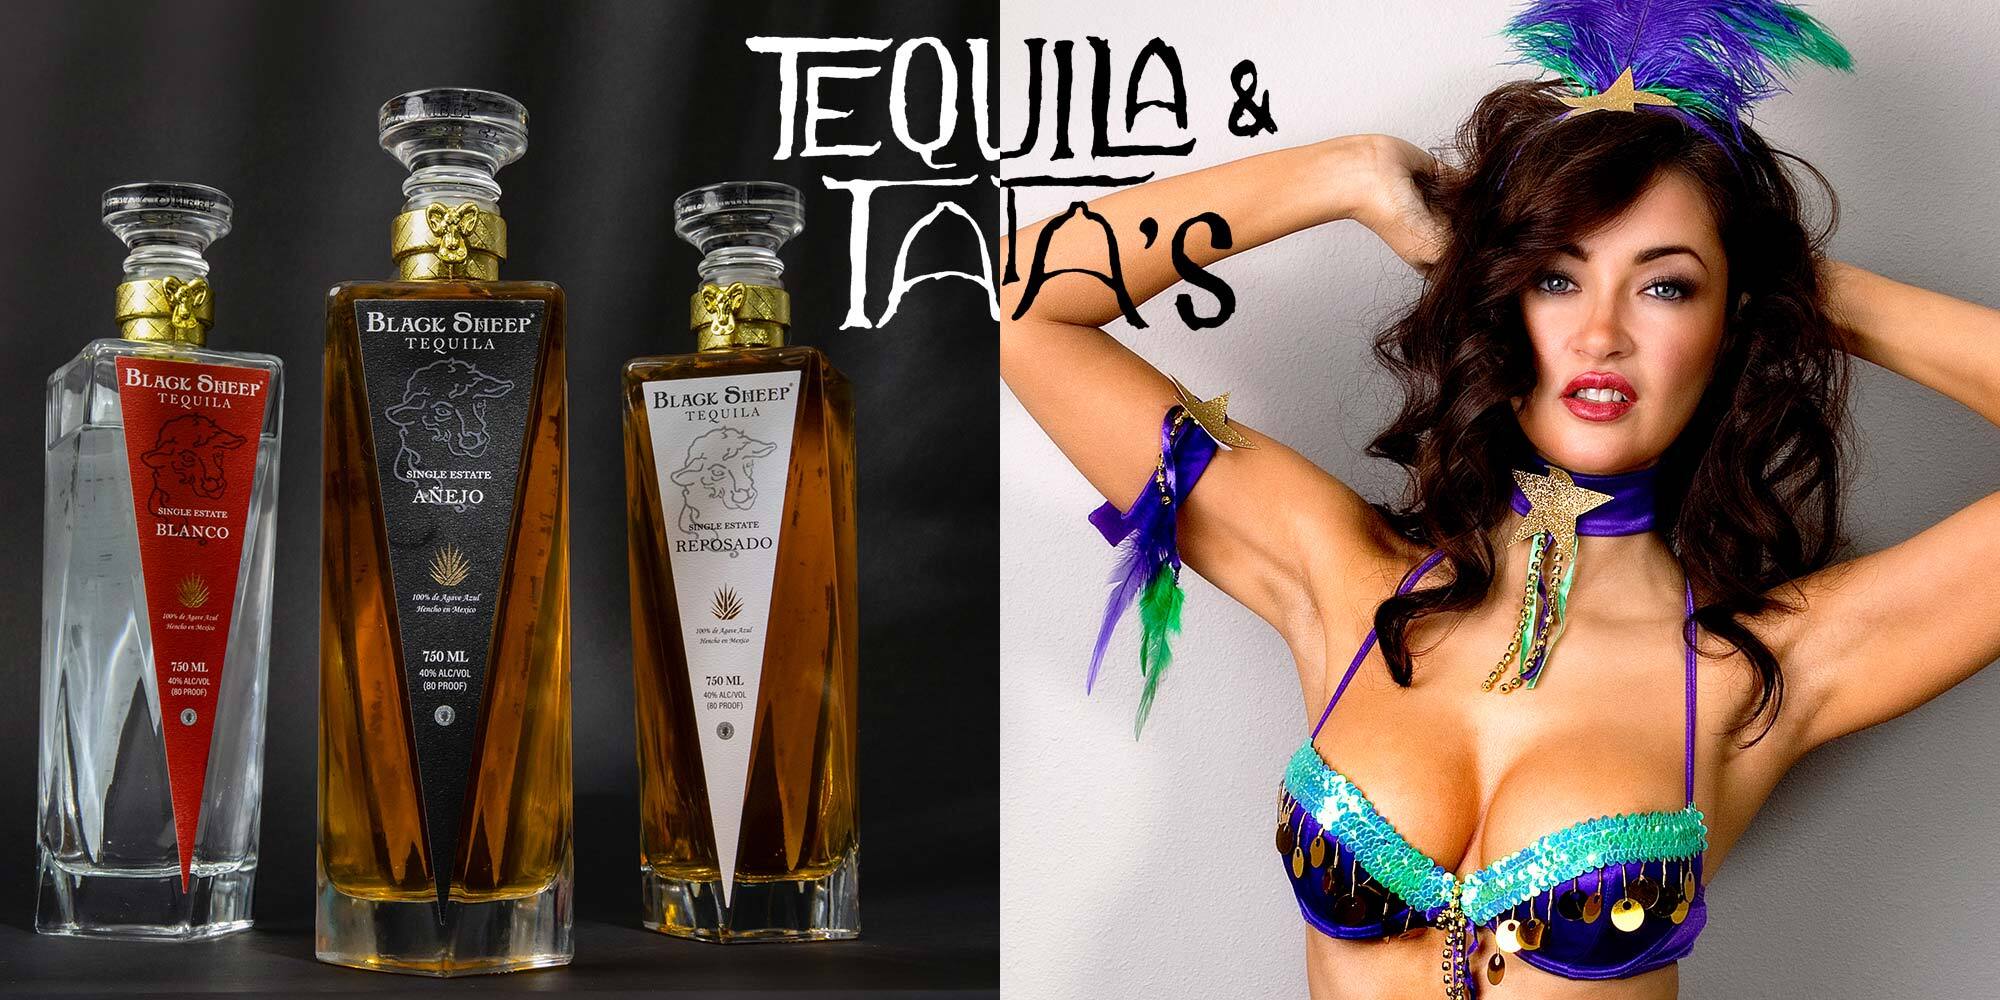 
7th Annual Tequila and Tatas Birthday Party